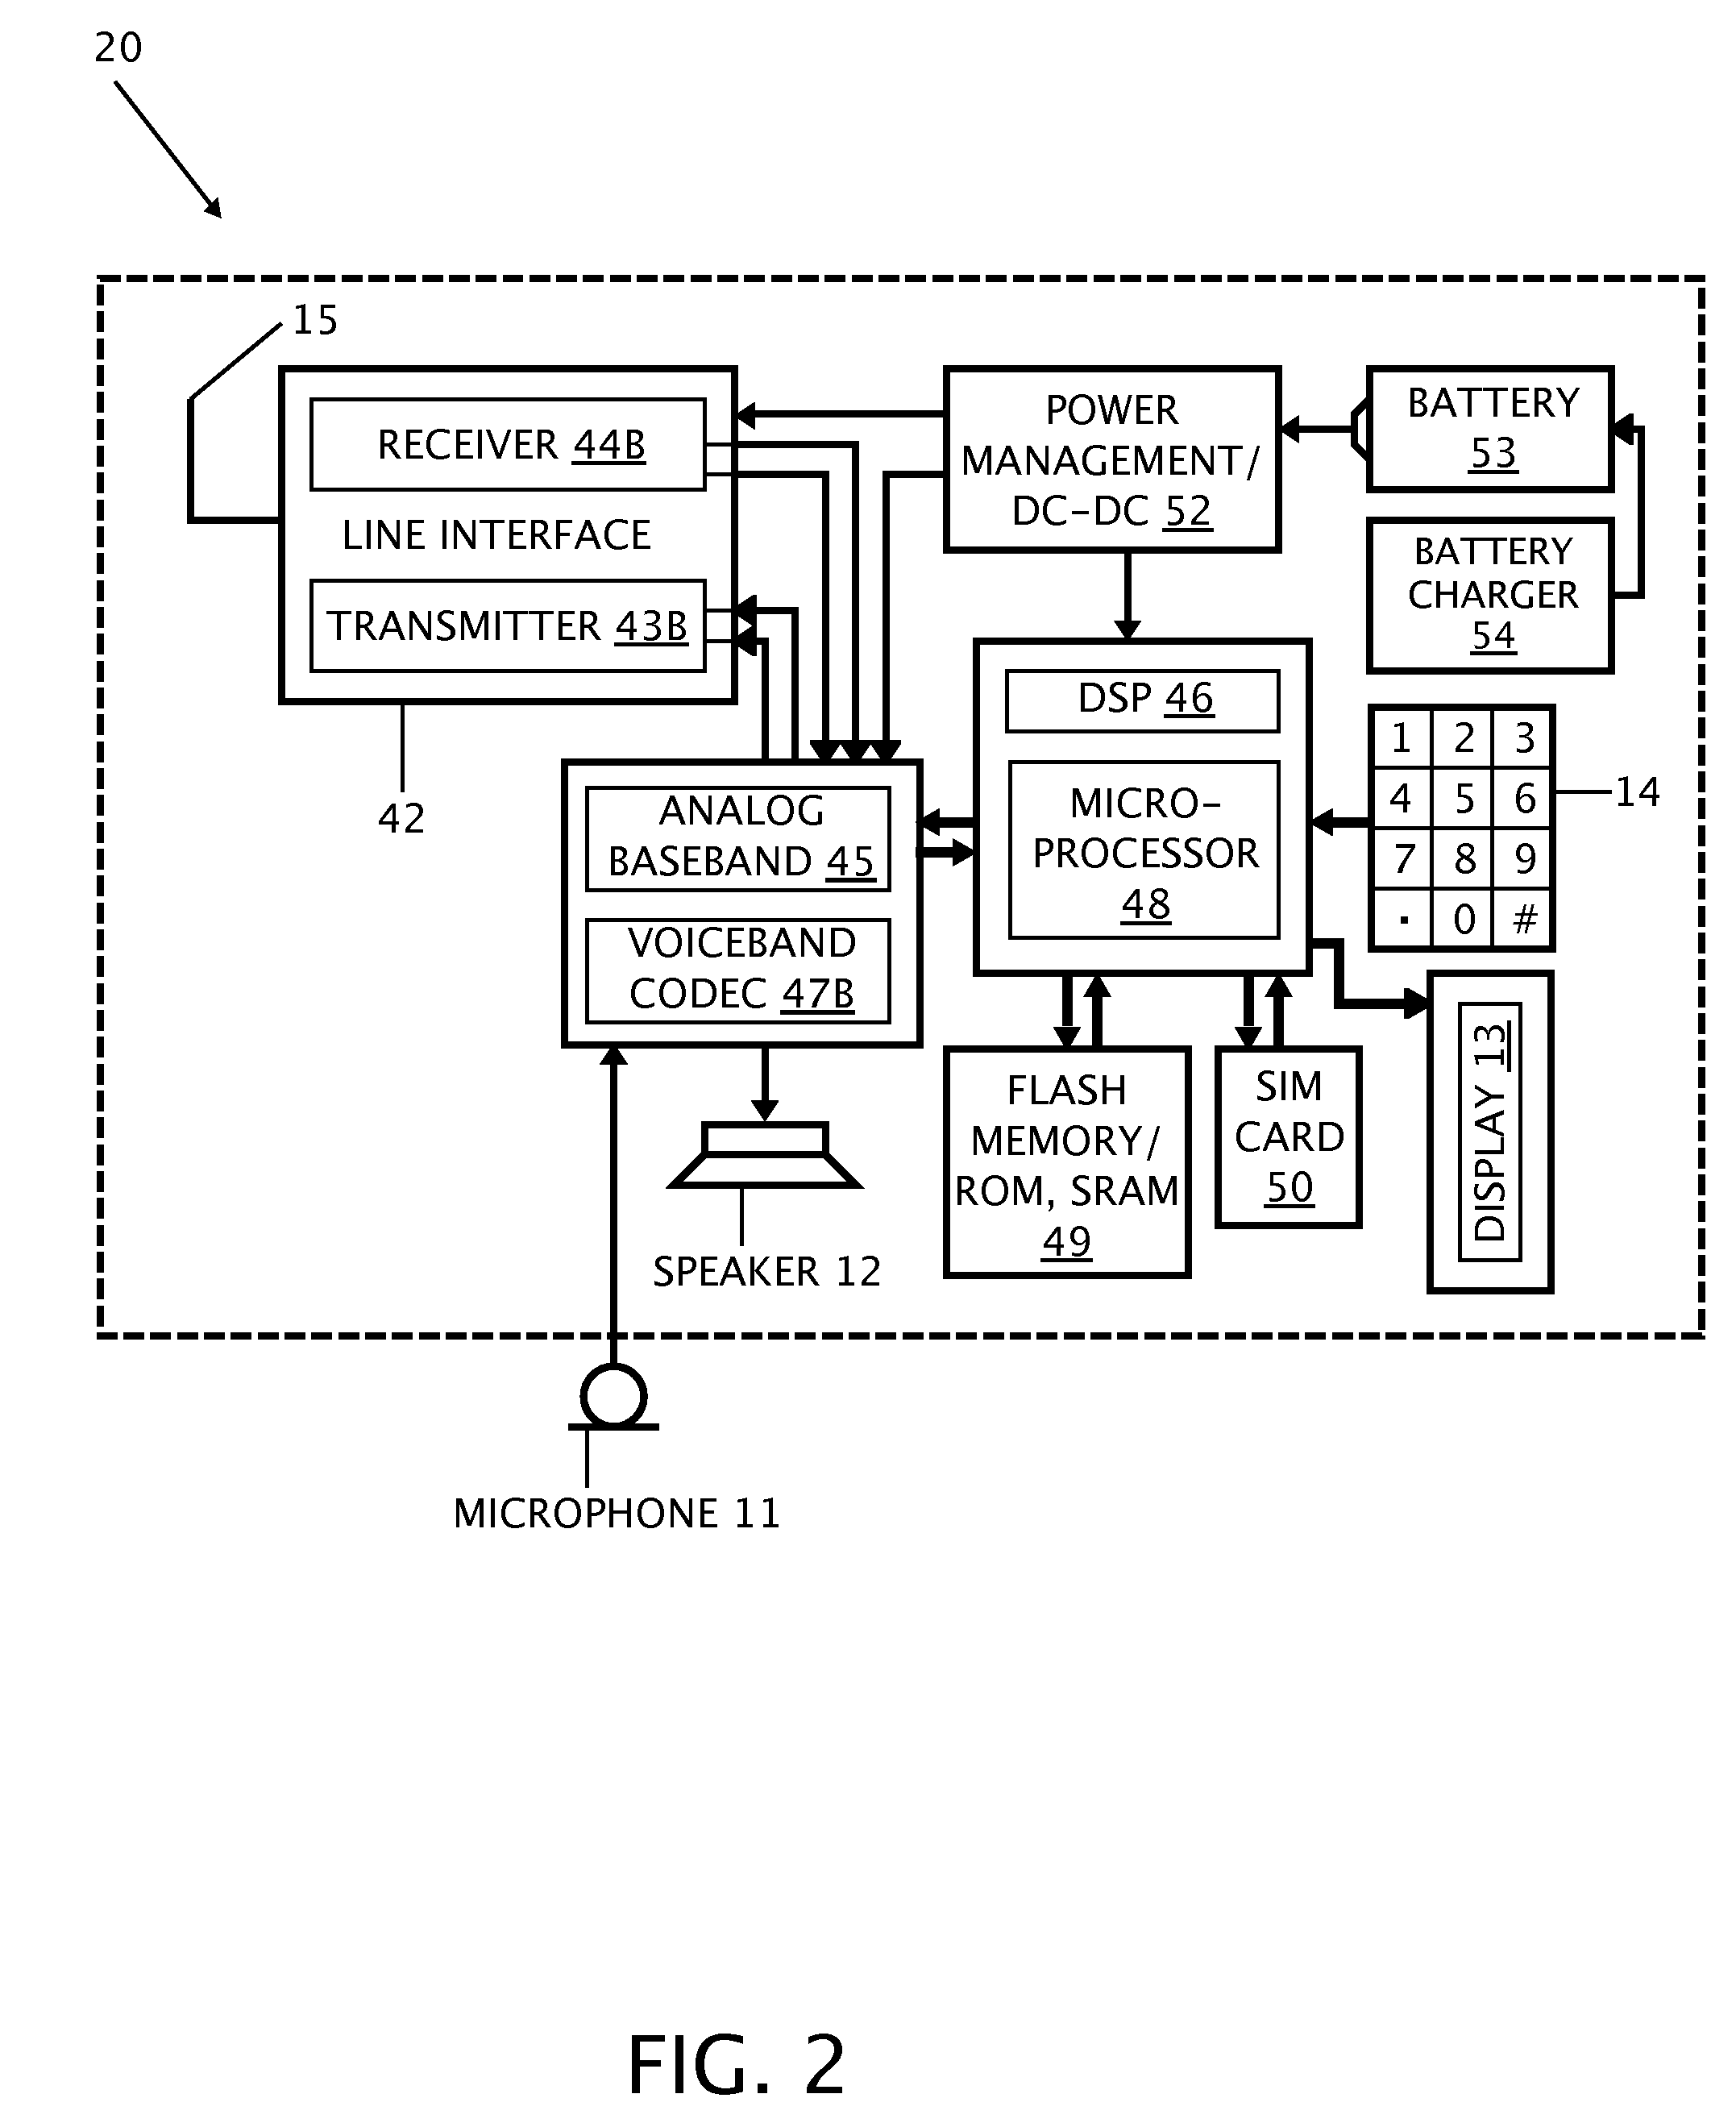 Voice coder with two microphone system and strategic microphone placement to deter obstruction for a digital communication device